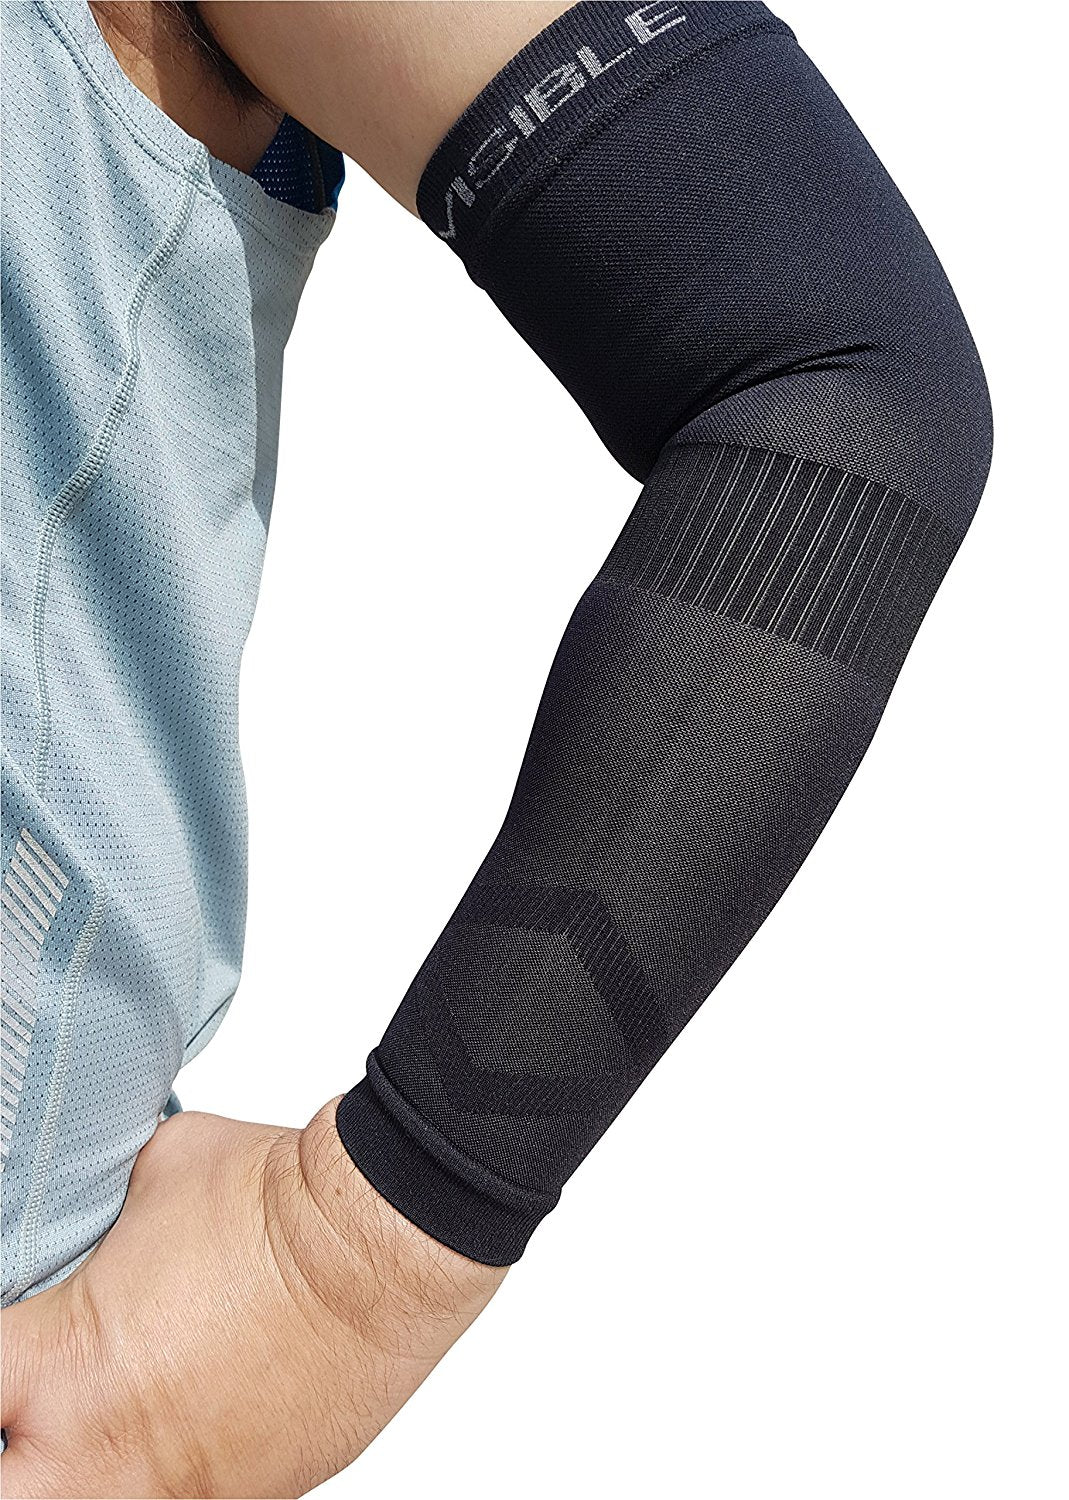 Arm Compression Sleeves - Black - from BeVisible Sports – BeVisible Sports